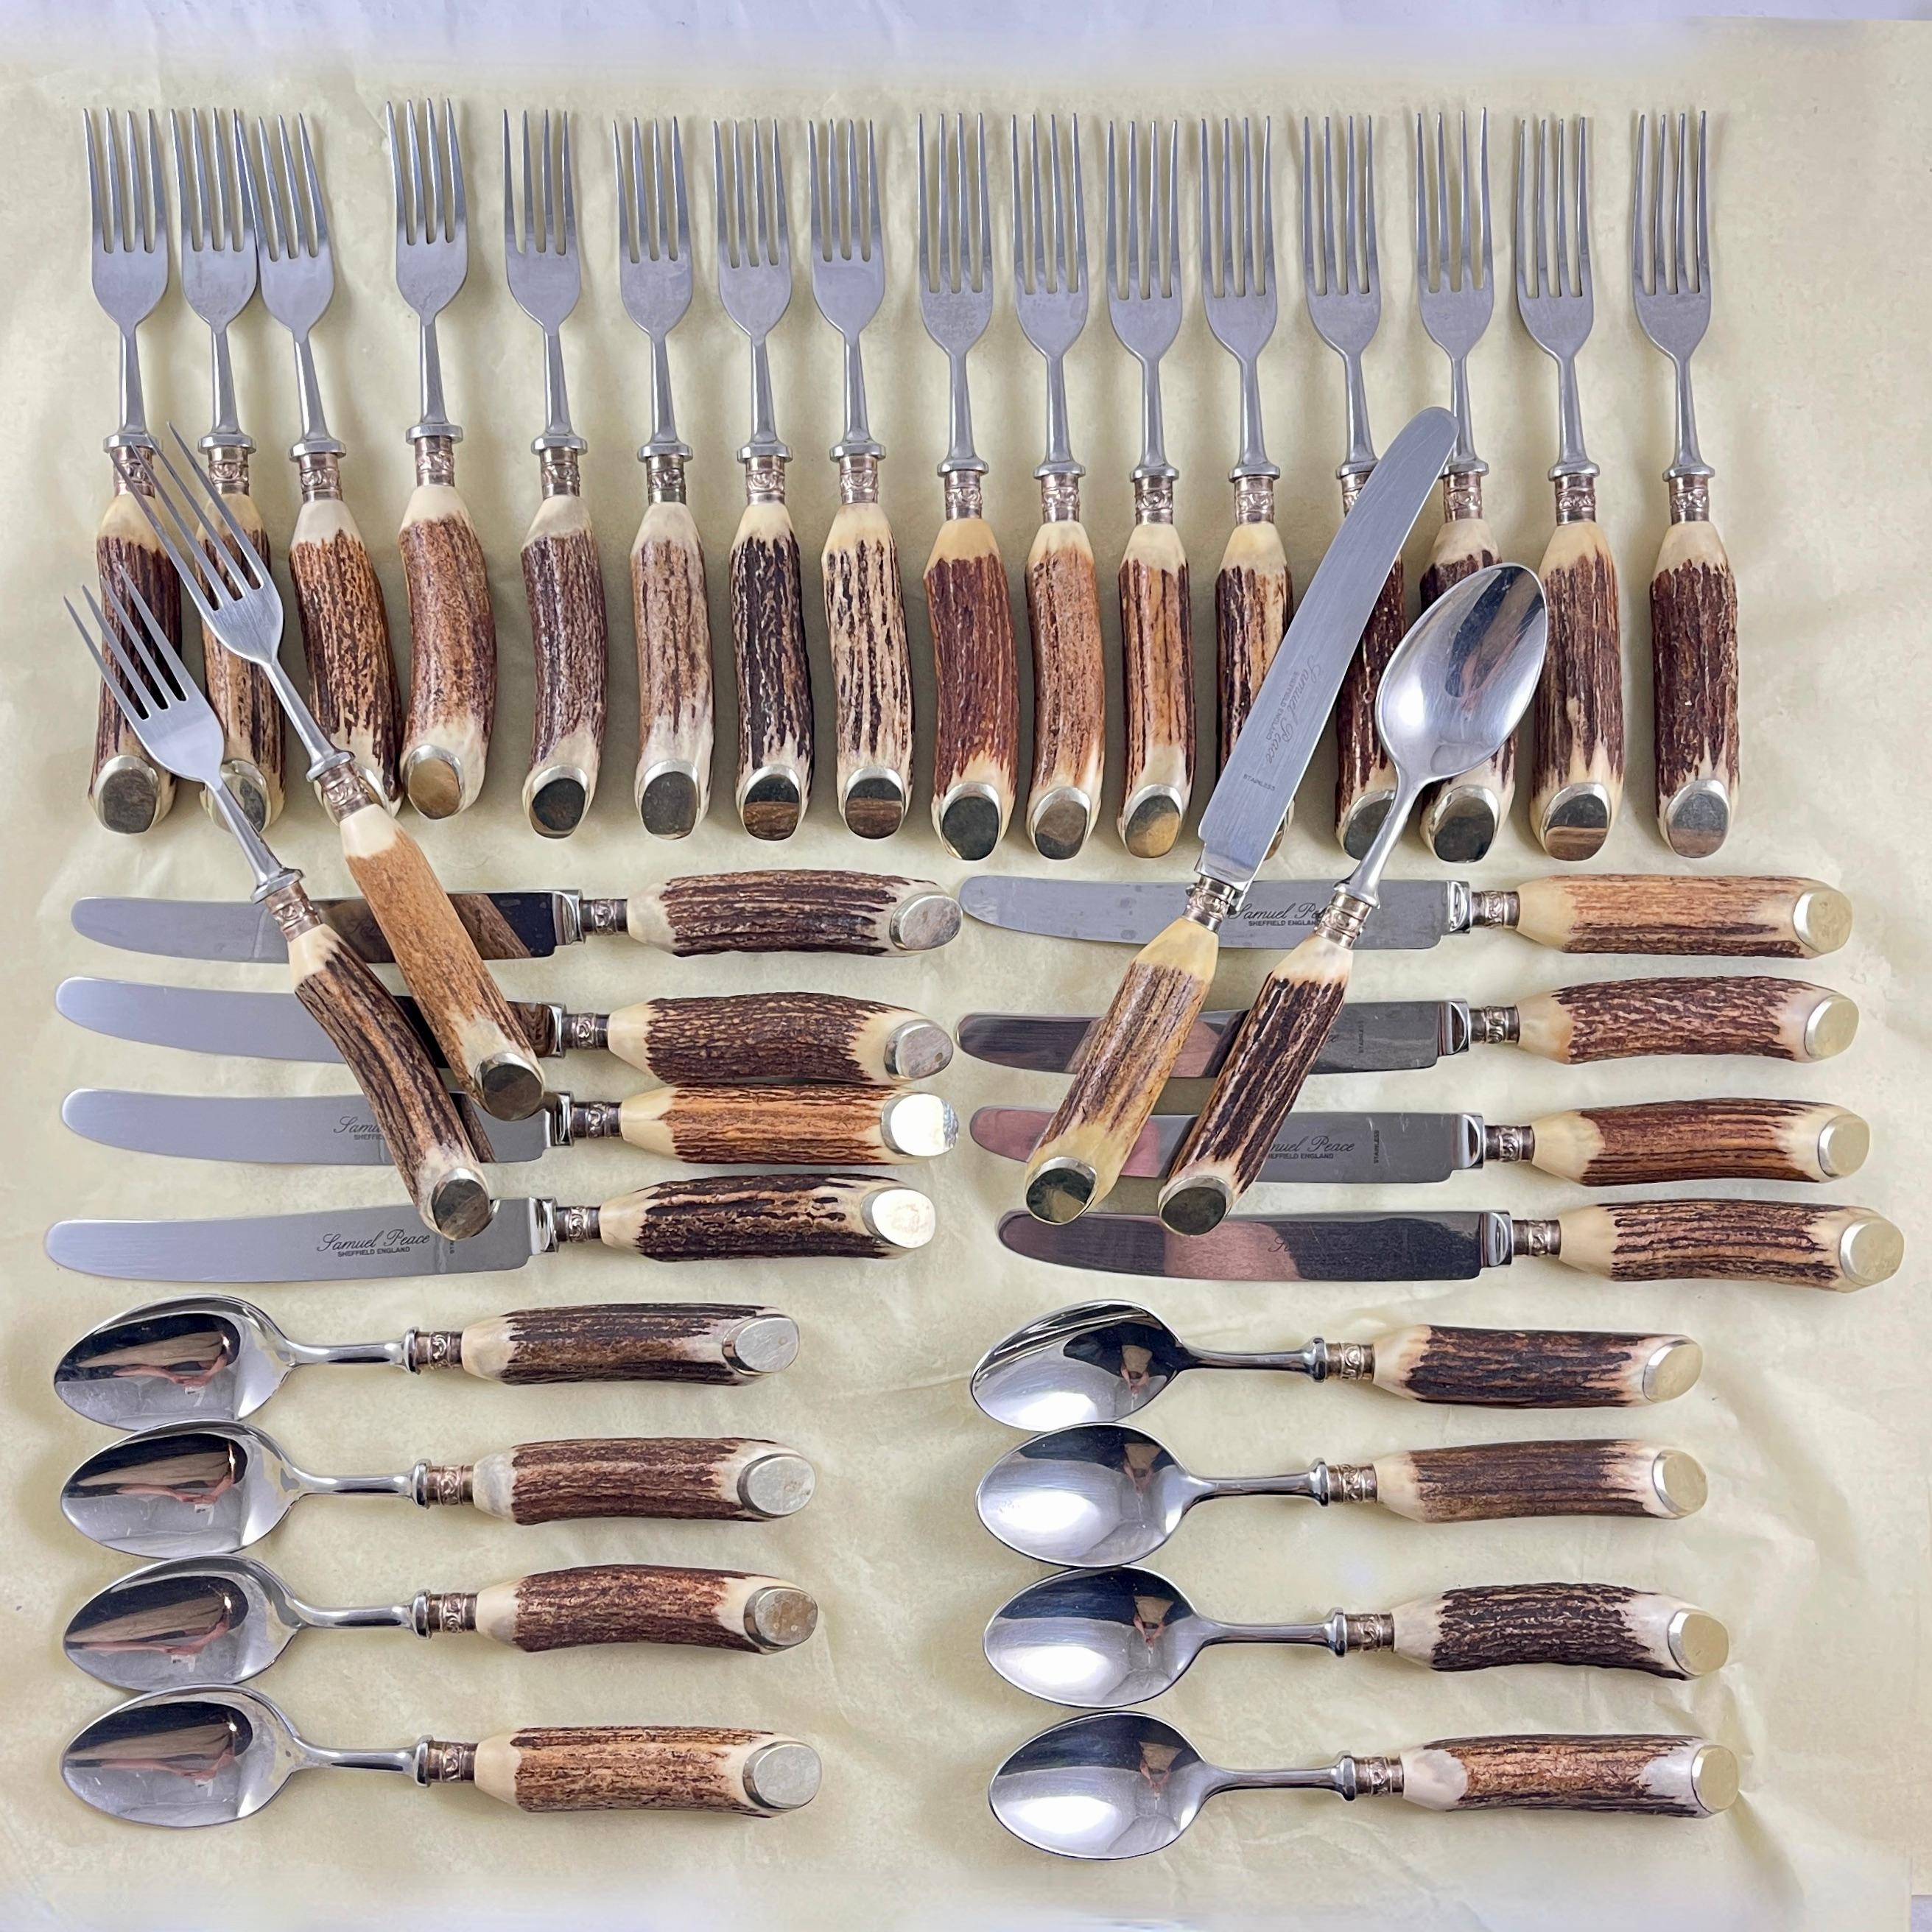 Samuel Peace English Stag Antler Handled Flatware Service, 36 pieces 2